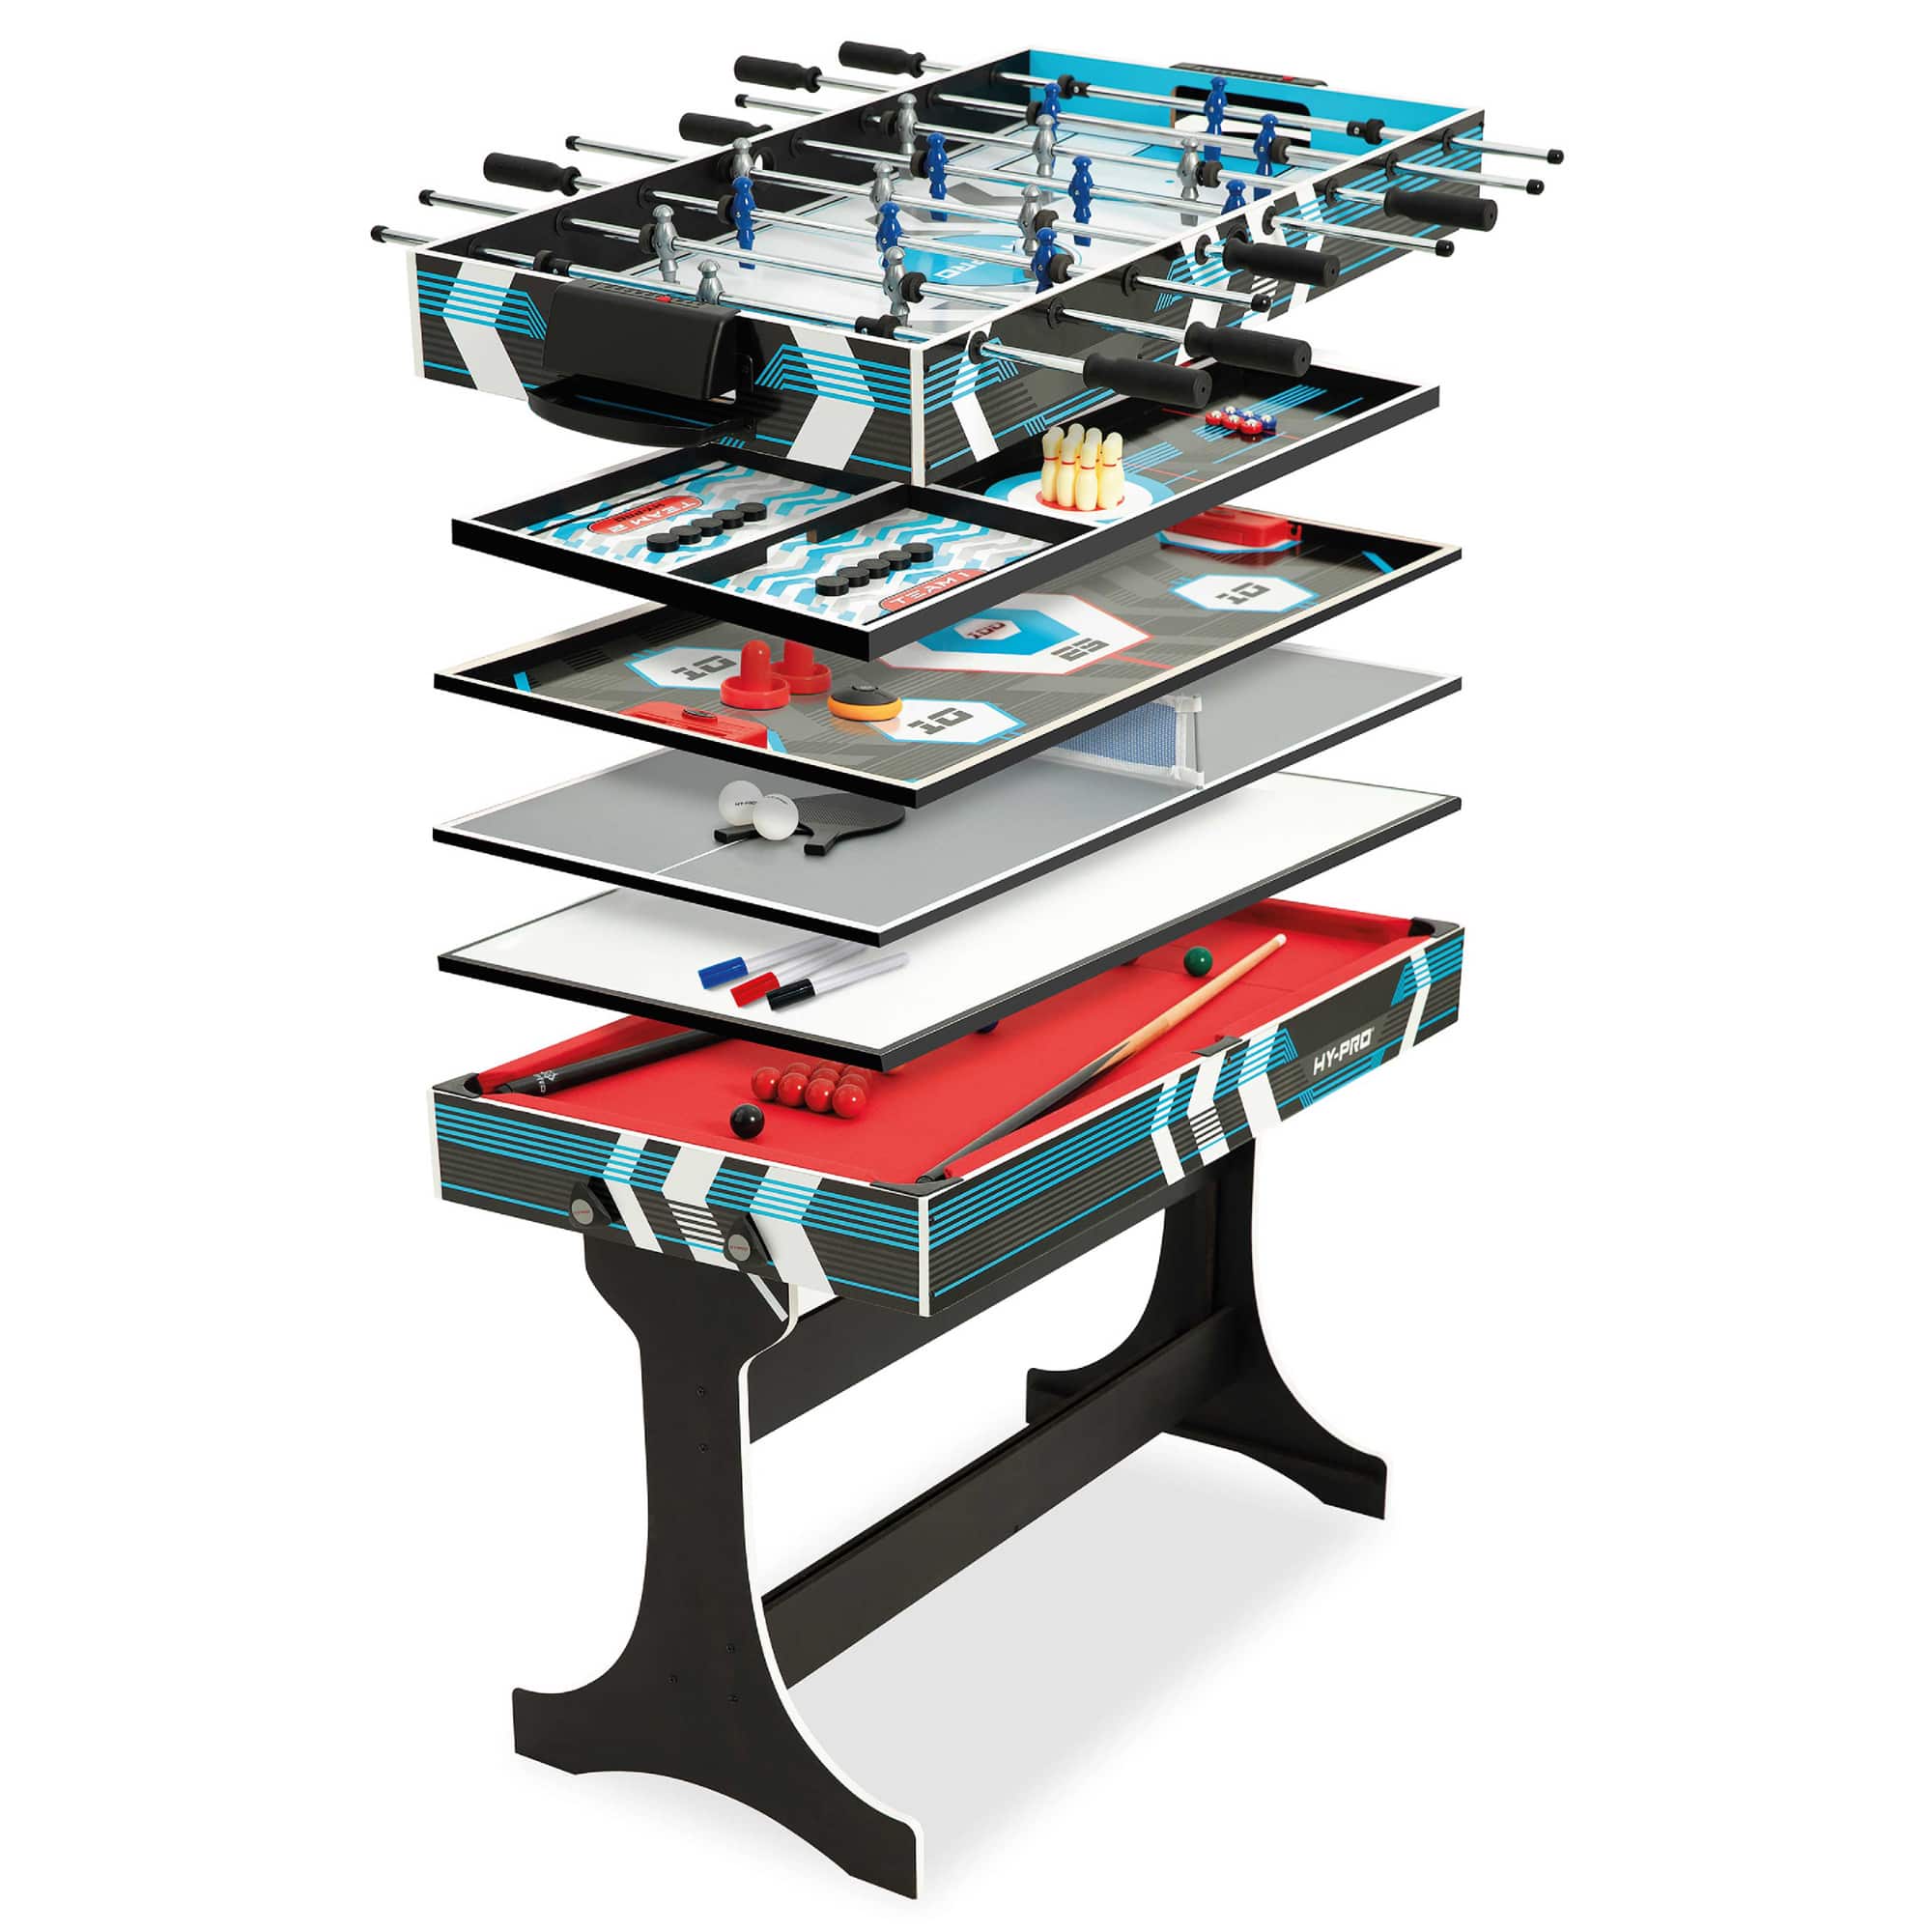 Hy-Pro Metron 12 Games-in-1 Table Top Game